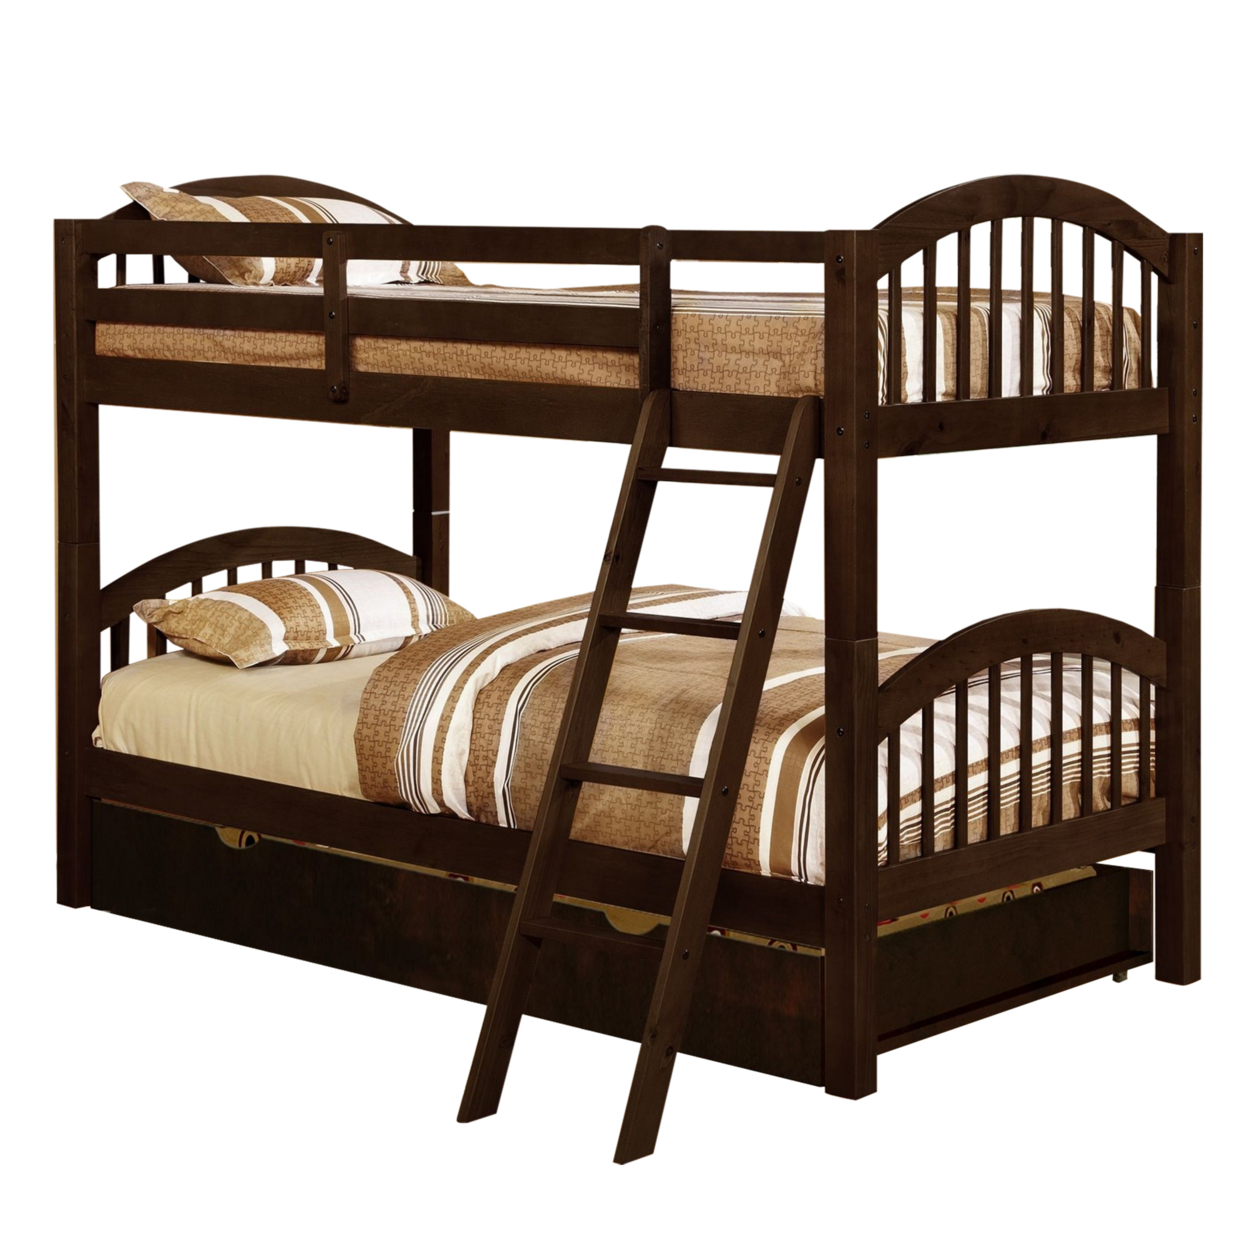 Arch Design Wooden Twin Over Twin Bunk Bed With Trundle, Dark Brown- Saltoro Sherpi